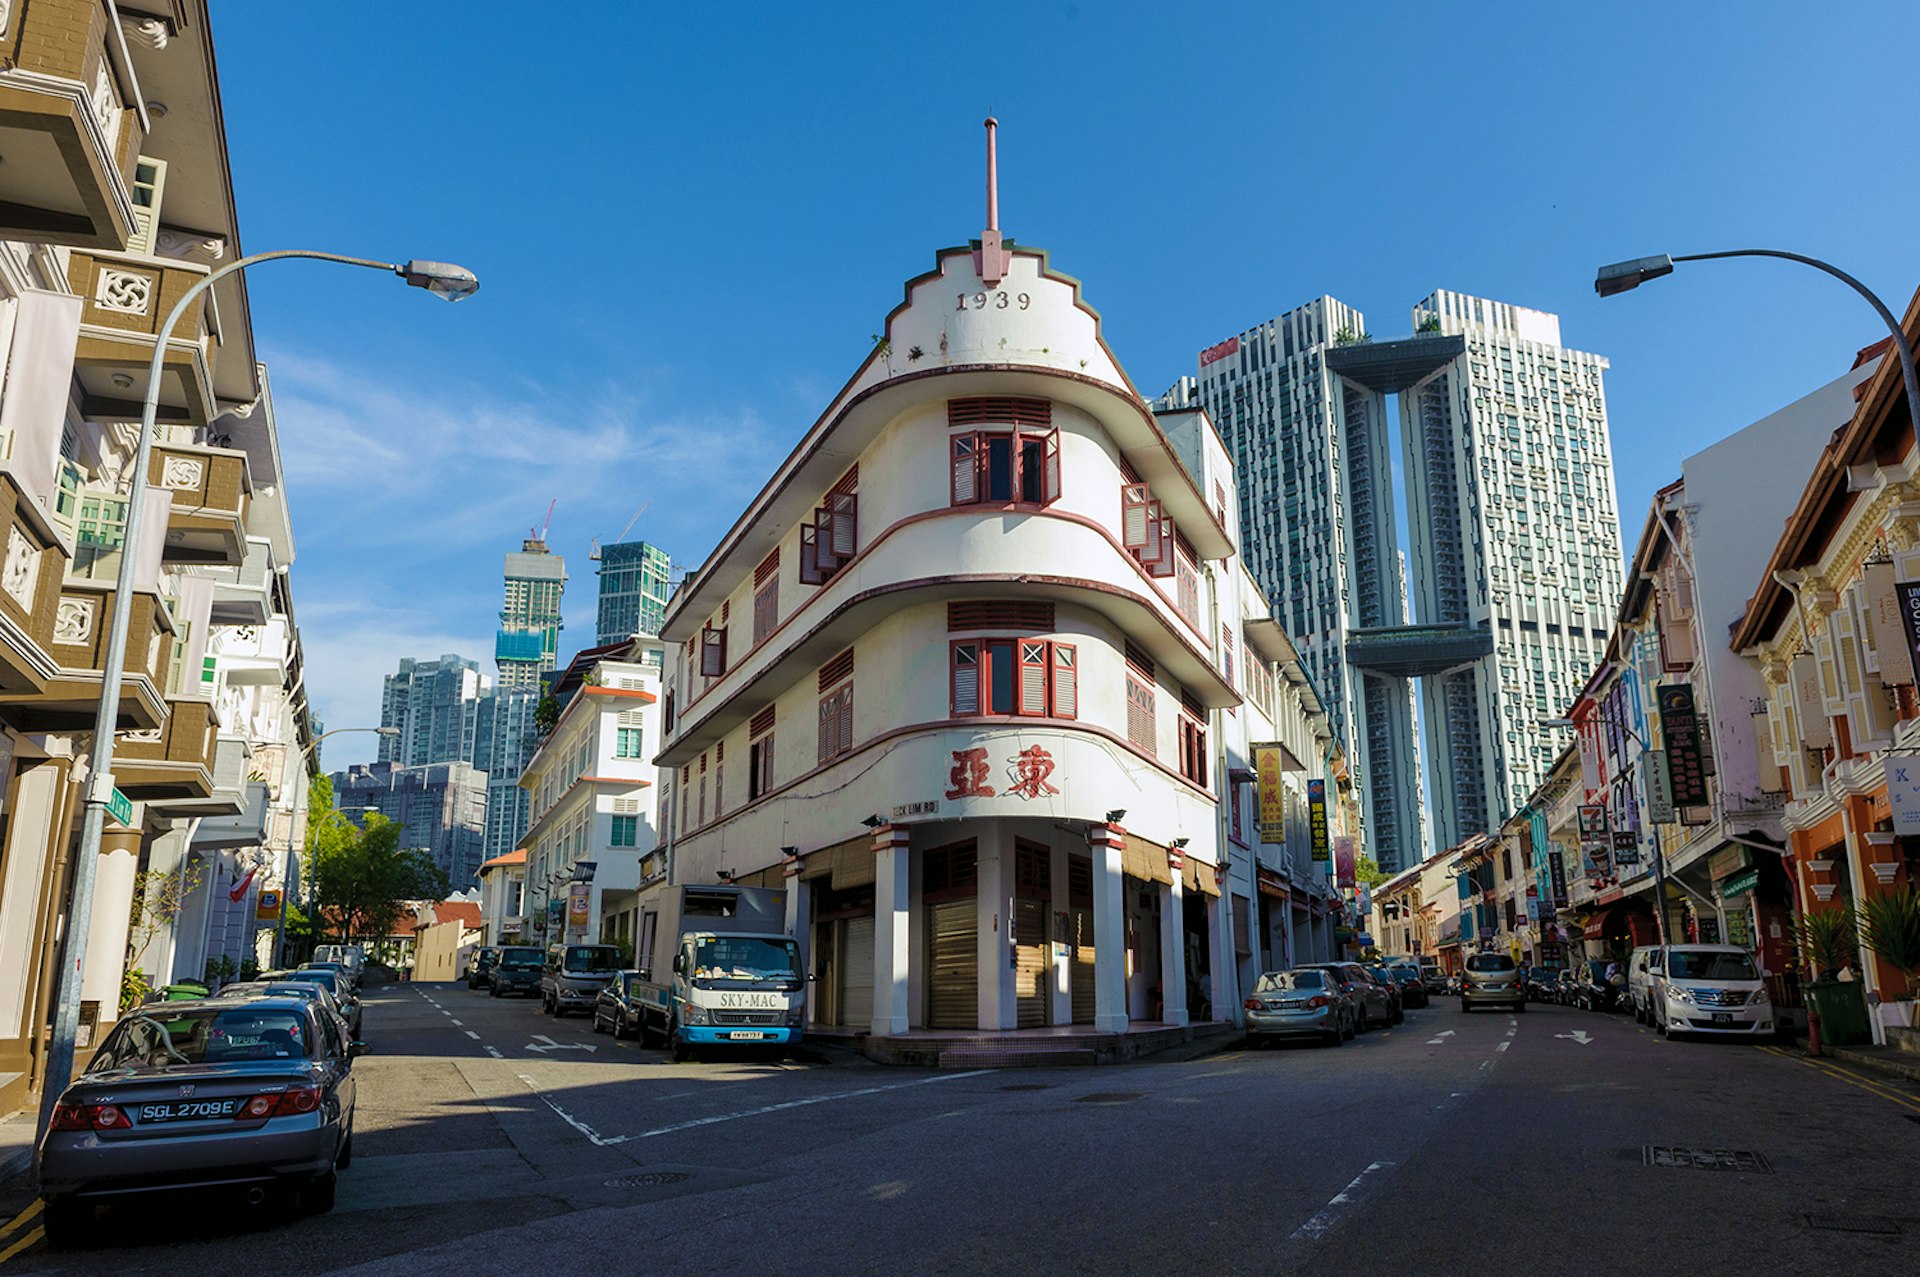 Keong Saik is a favourite after-dark haunt for Singapore's cool crowd © Silas Khua / CC BY 2.0